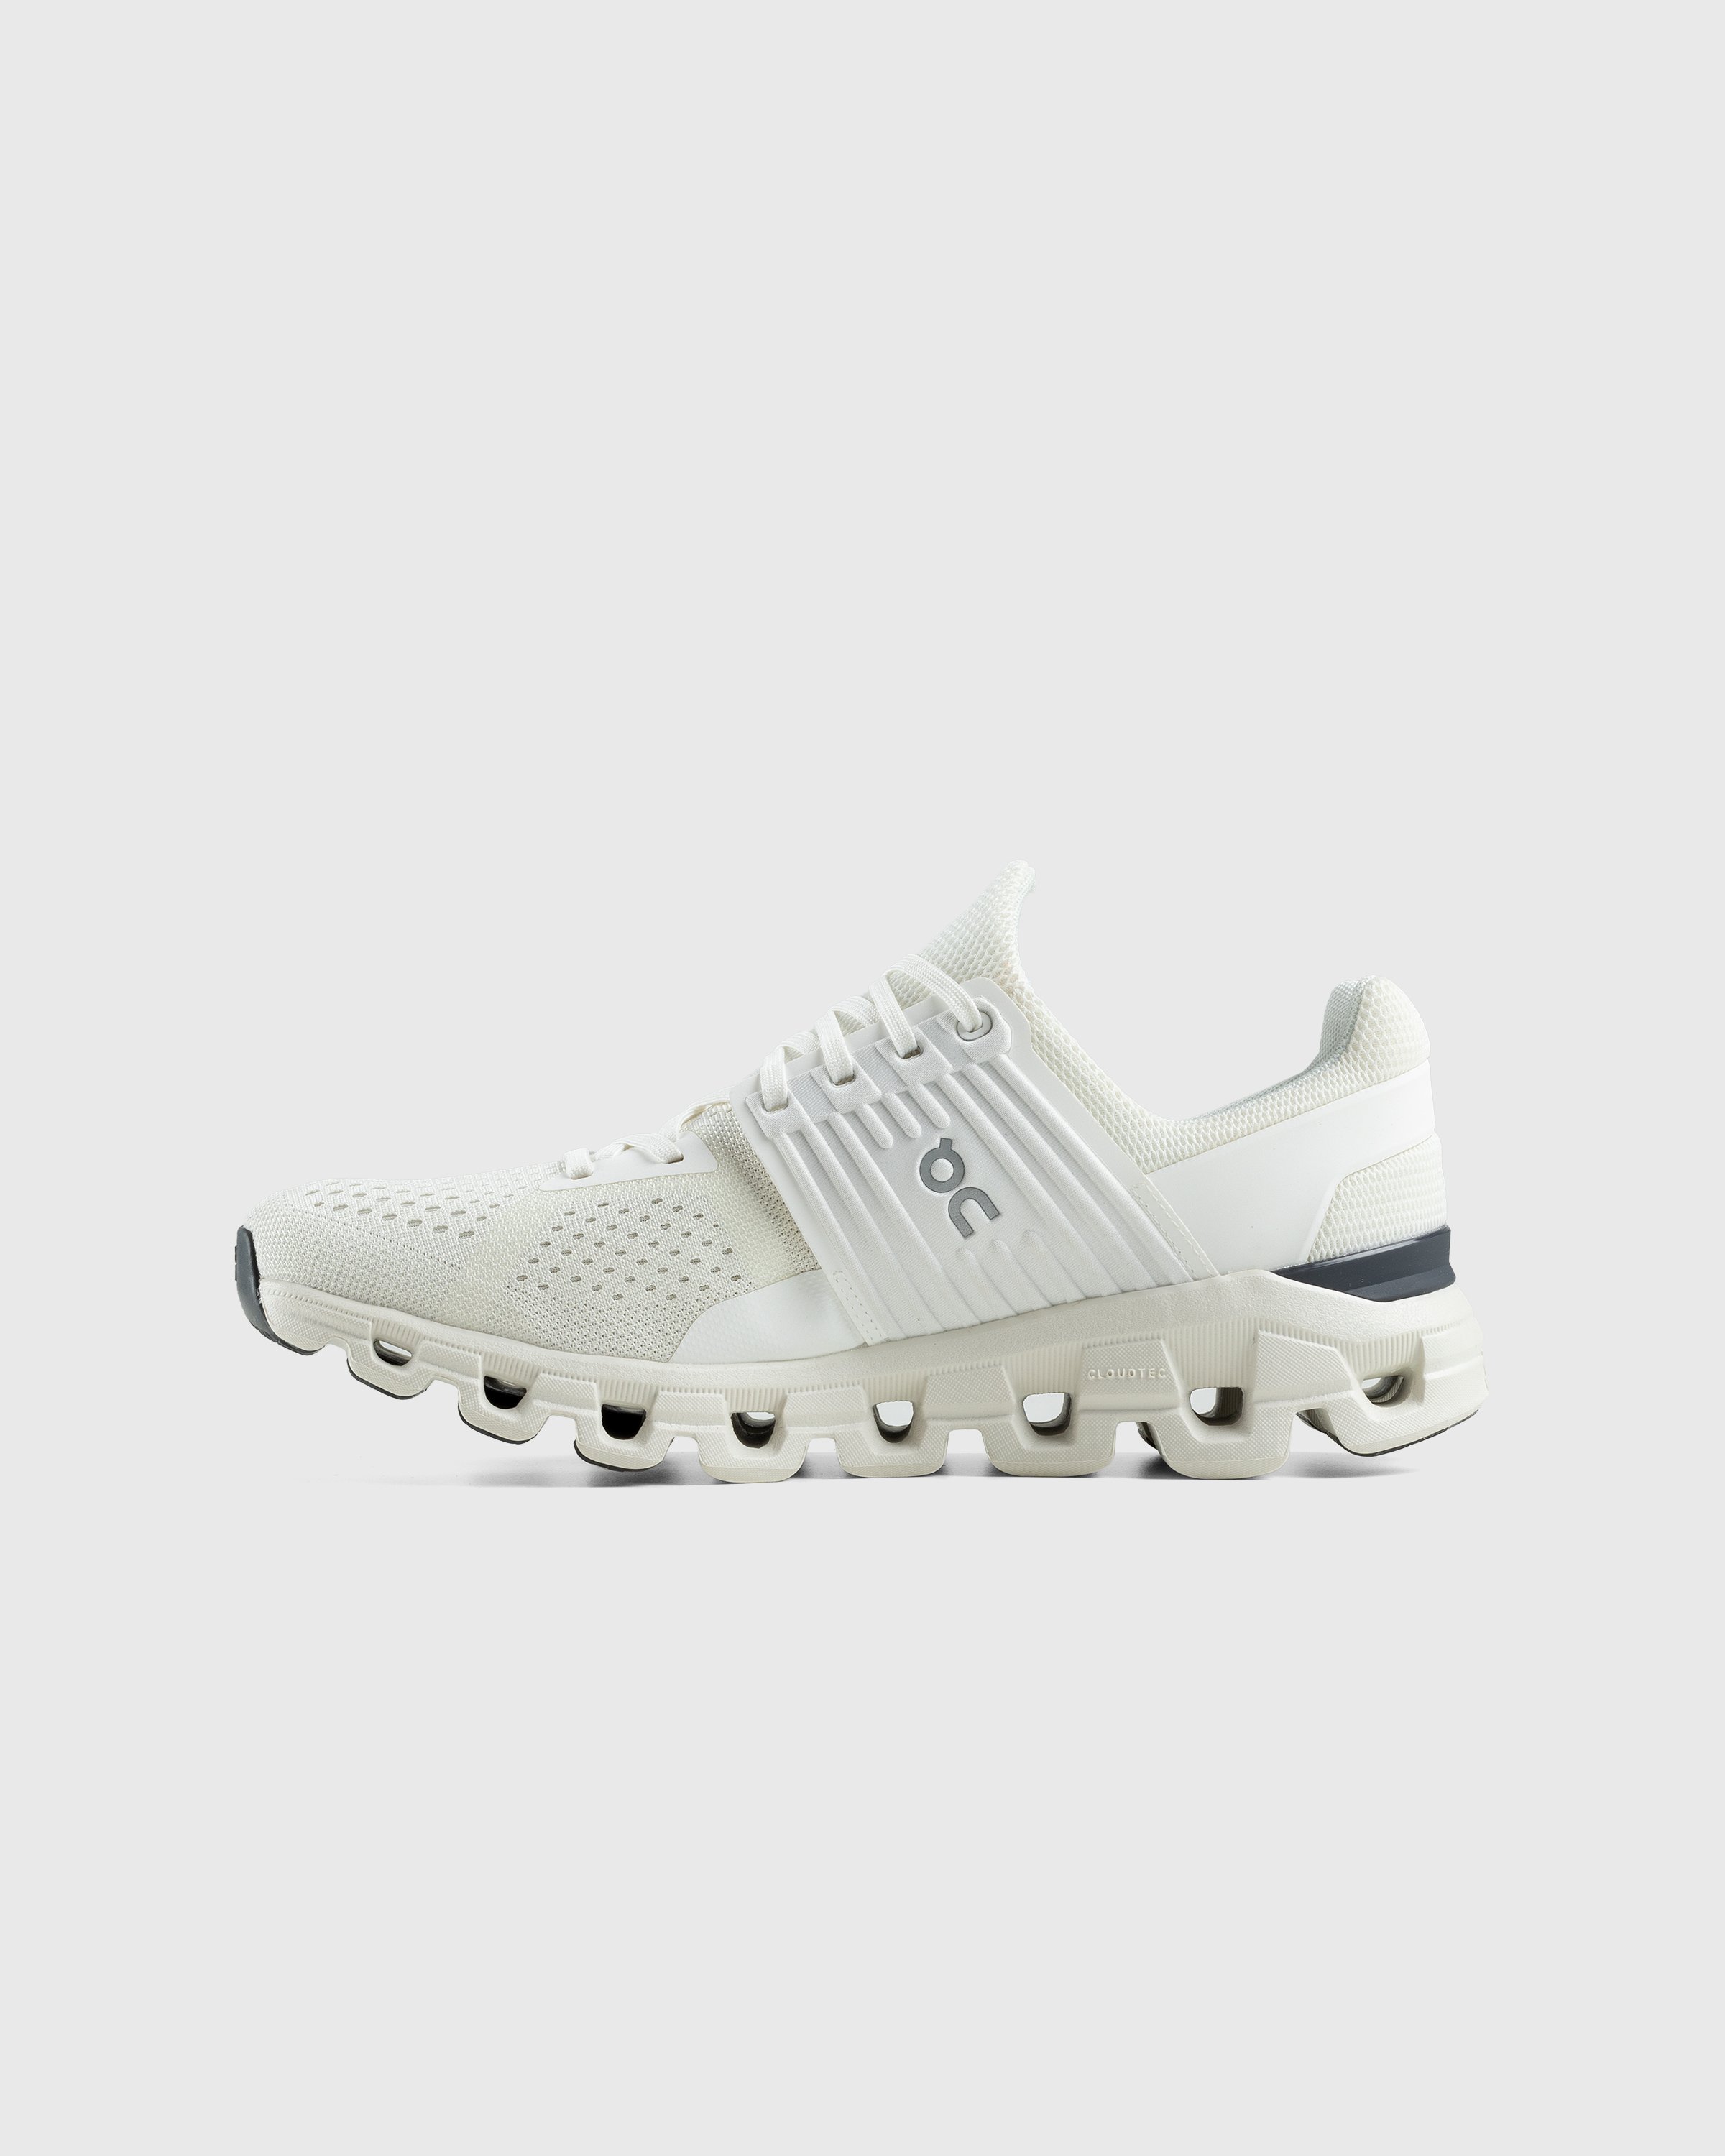 On - Cloudswift All White - Footwear - White - Image 2